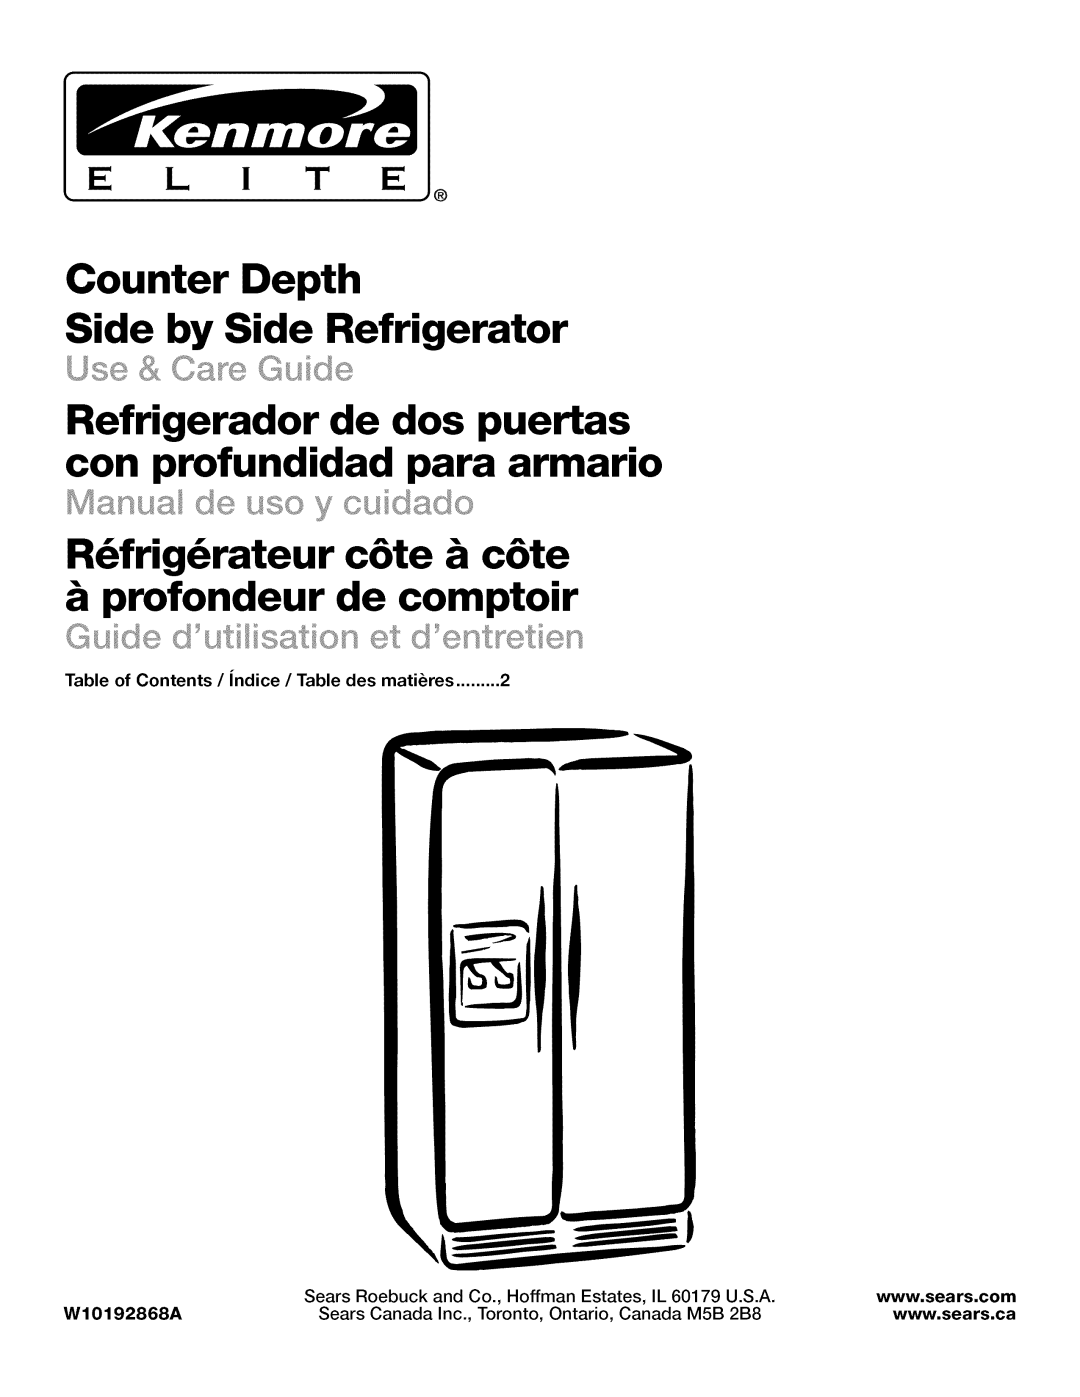 Kenmore 10646033800 manual E I E, Counter Depth, Side by Side Refrigerator, Sears Roebuck, and Co., Hoffman Estates, IL 